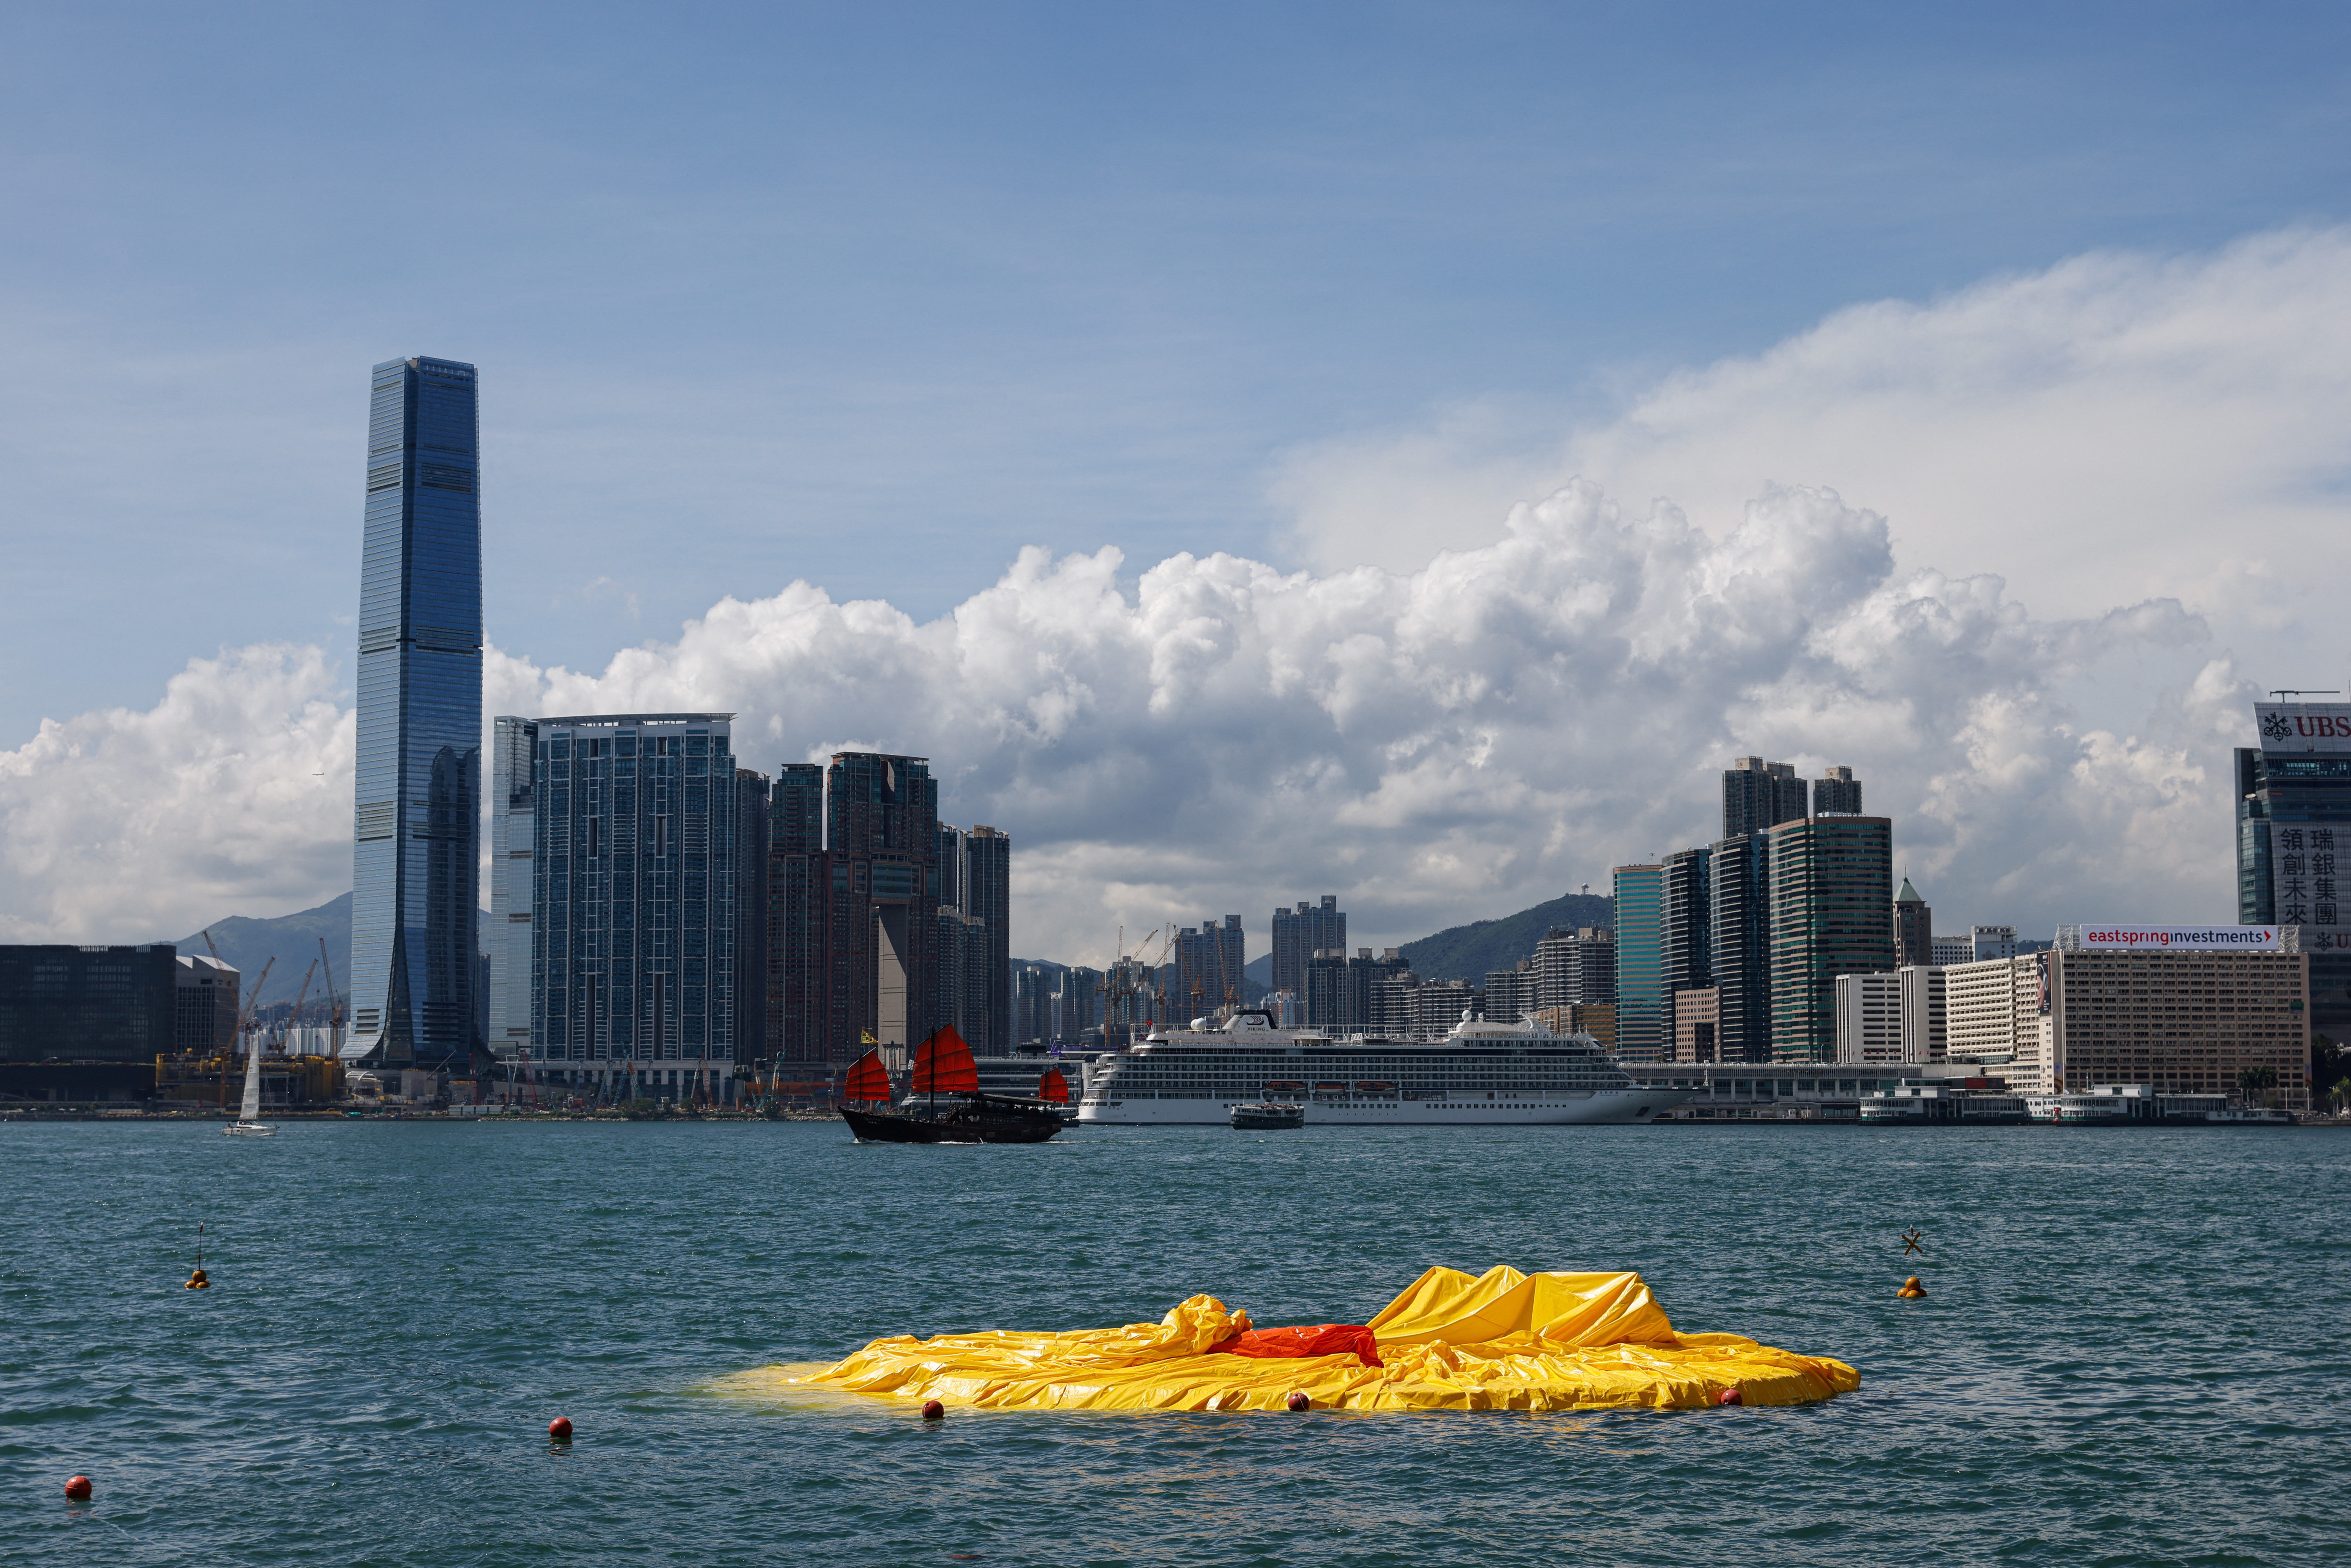 One of the inflatable yellow ducks created by Dutch artist Florentijn Hofman is seen deflated at Victoria Harbour in Hong Kong